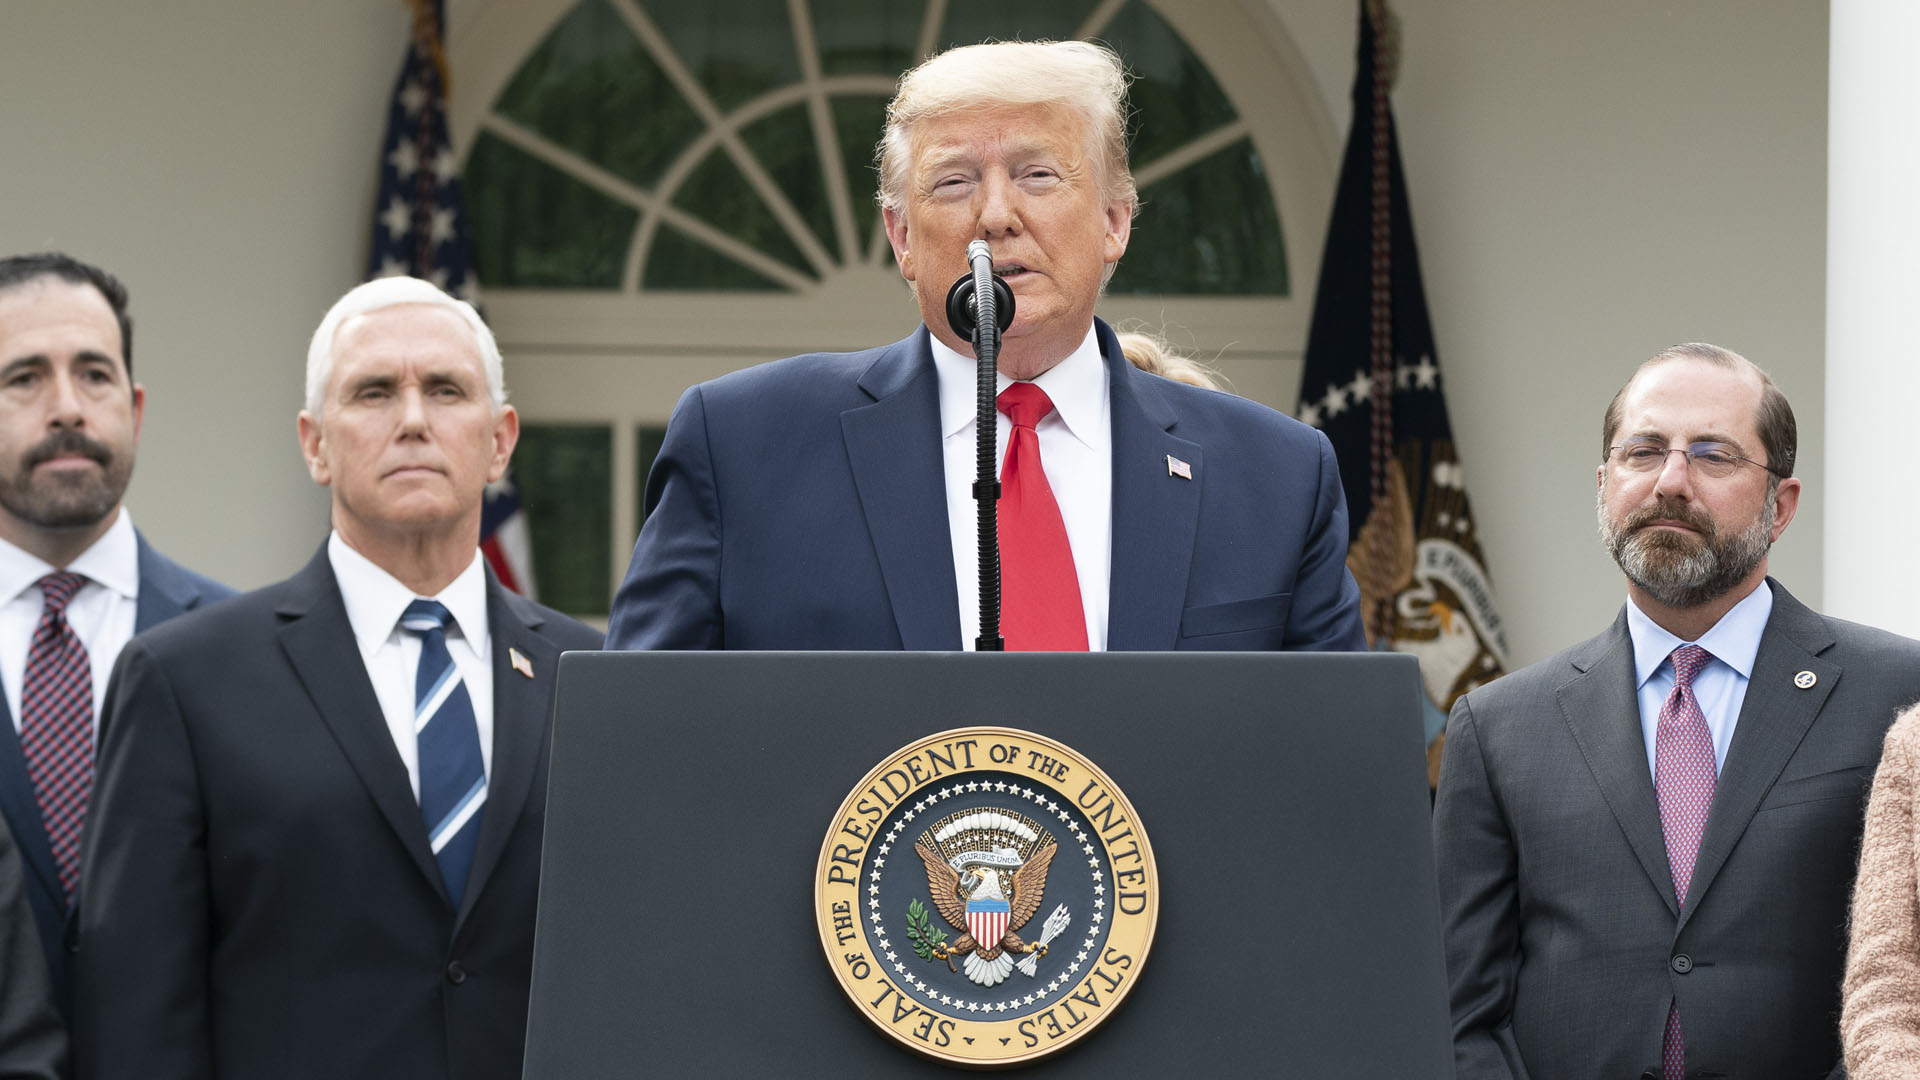 President Donald Trump declares a national emergency to further combat the ongoing Covid-19 pandemic at a news conference on March 13.